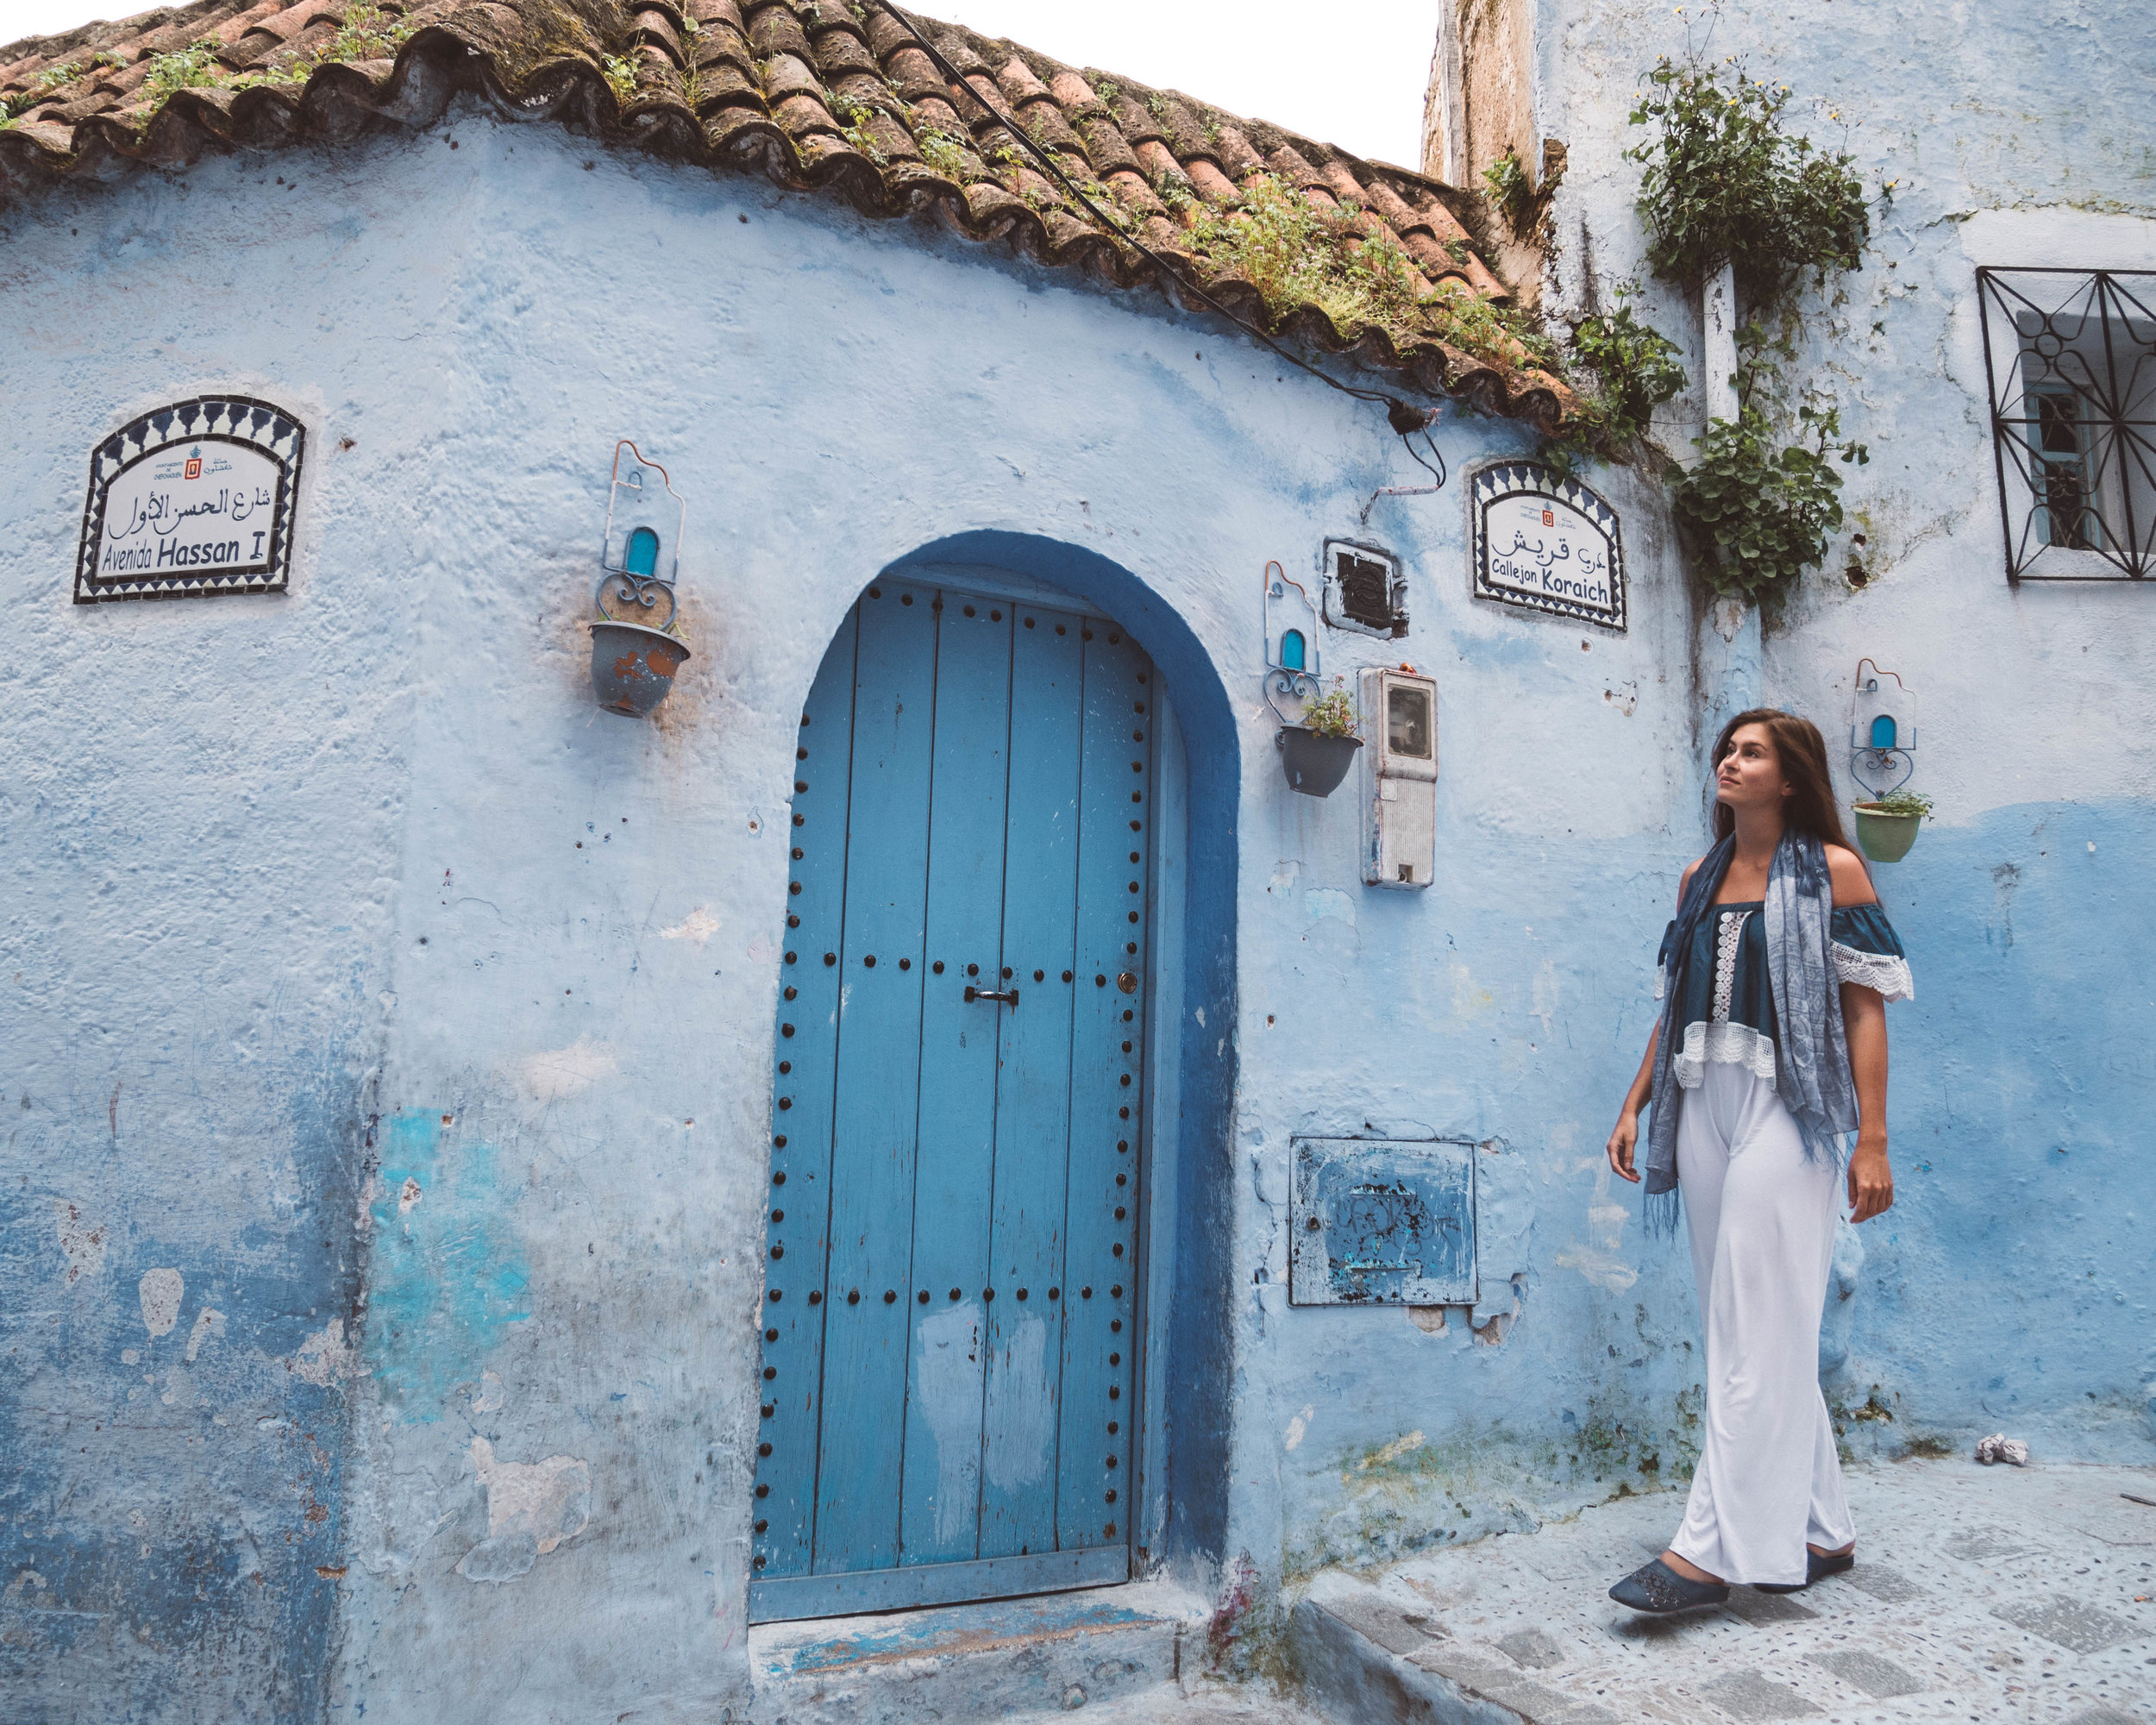 Me walking in front of someone's blue house - Chefchaouen - Morocco